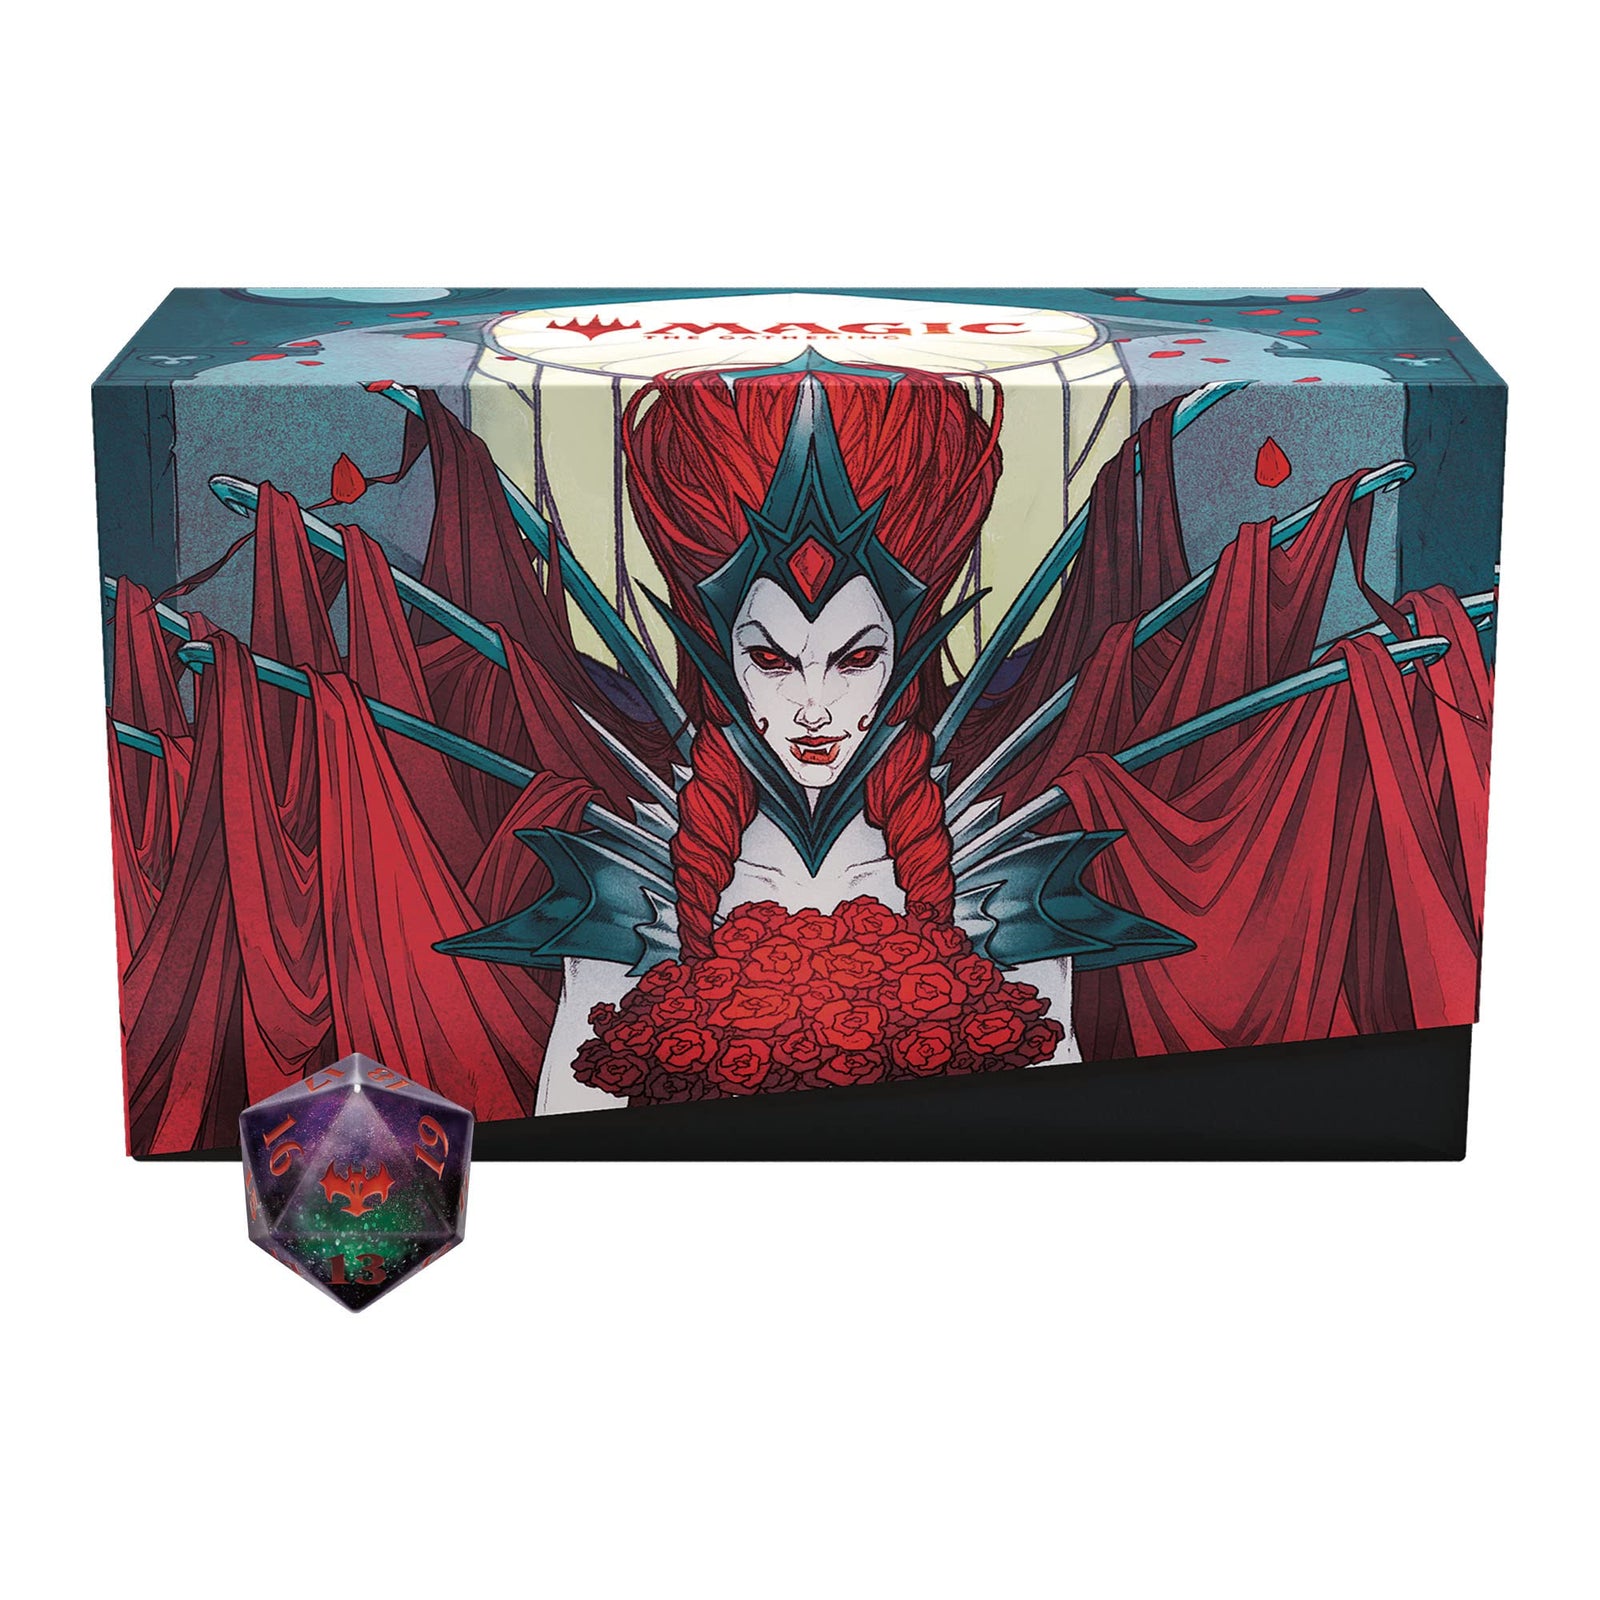 Magic: The Gathering Innistrad: Crimson Vow Bundle | 8 Set Boosters + Accessories